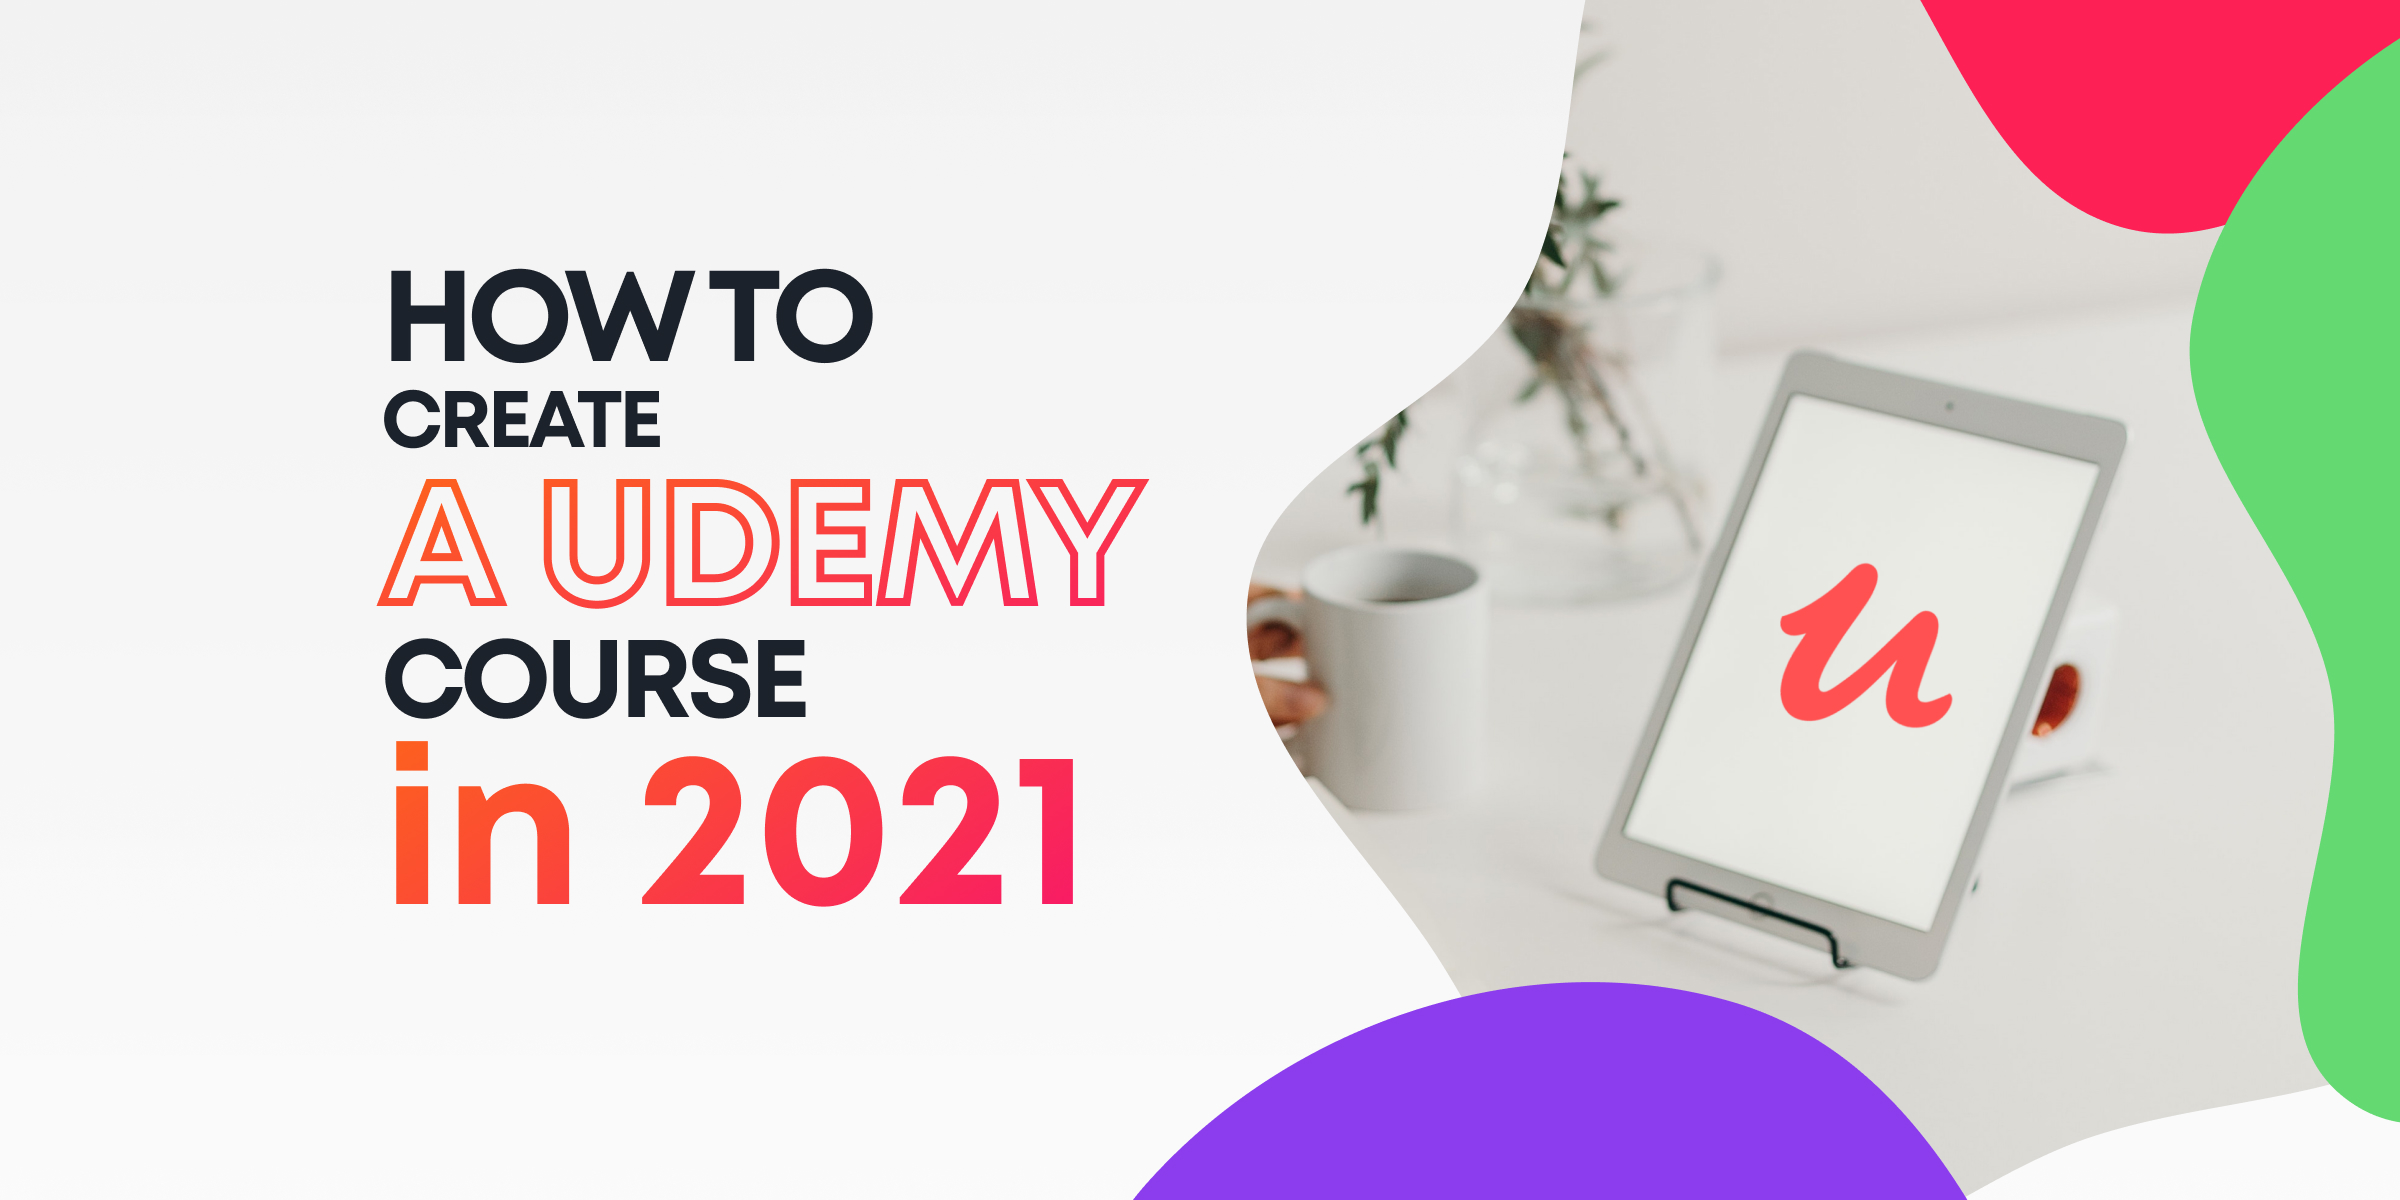 How To Create A Udemy Course In 2021 An Ultimate Guide For Beginners